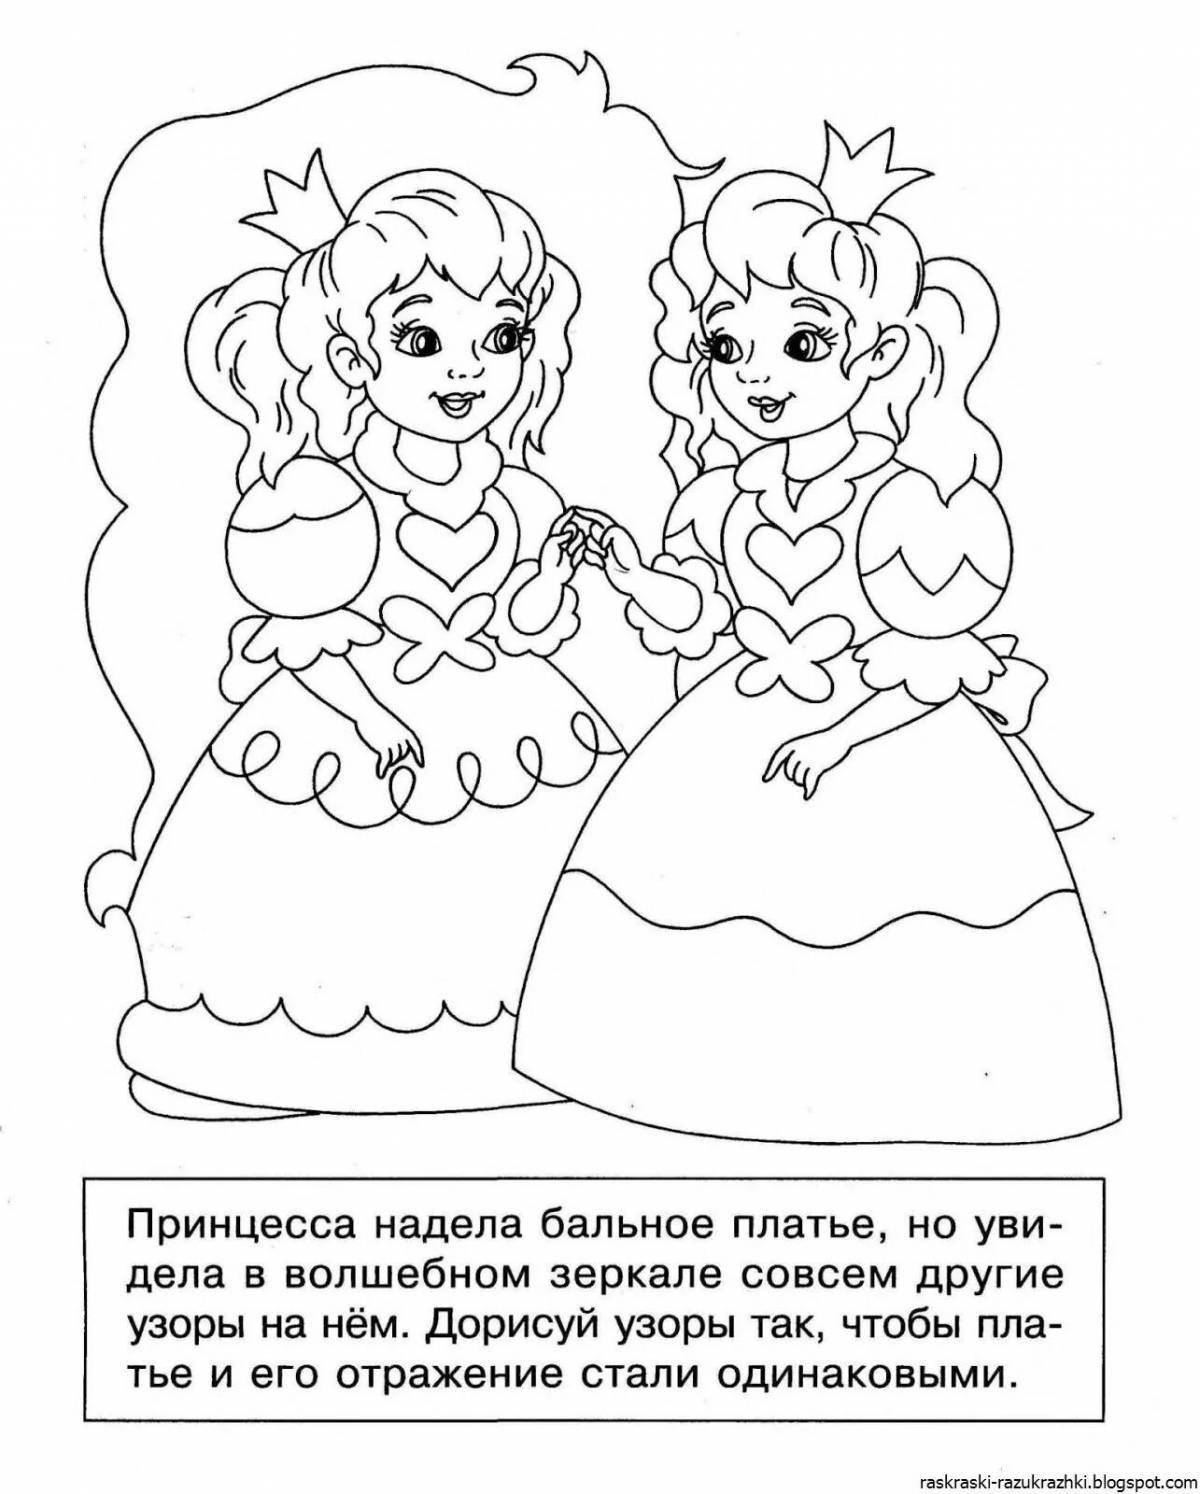 Creative coloring book for girls 6-7 years old